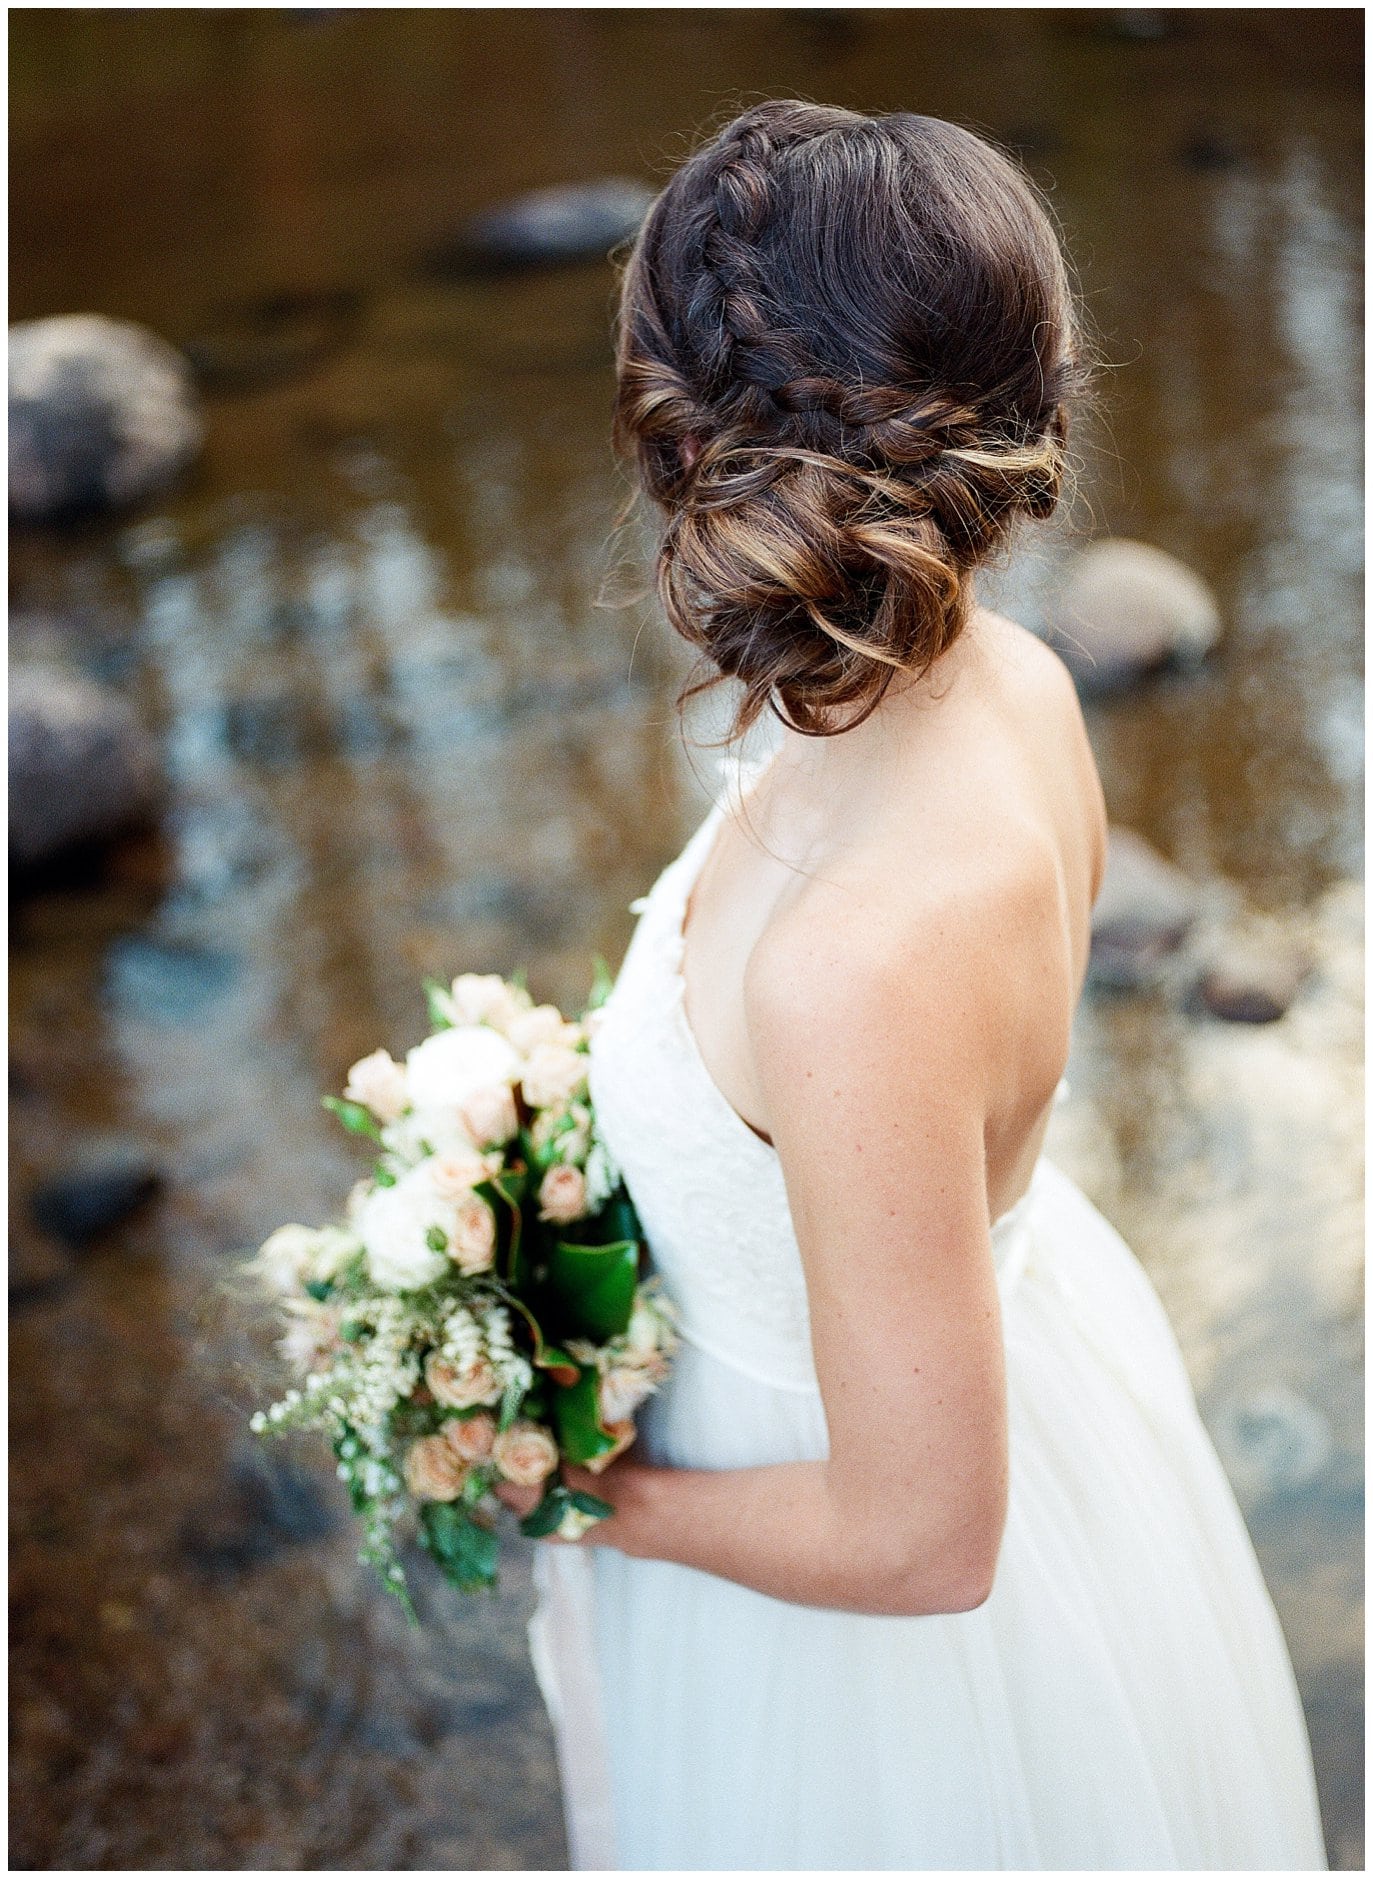 french braid bridal updo at Piney River Ranch intimate wedding by Beaver Creek wedding photographer Jennie Crate Photographer